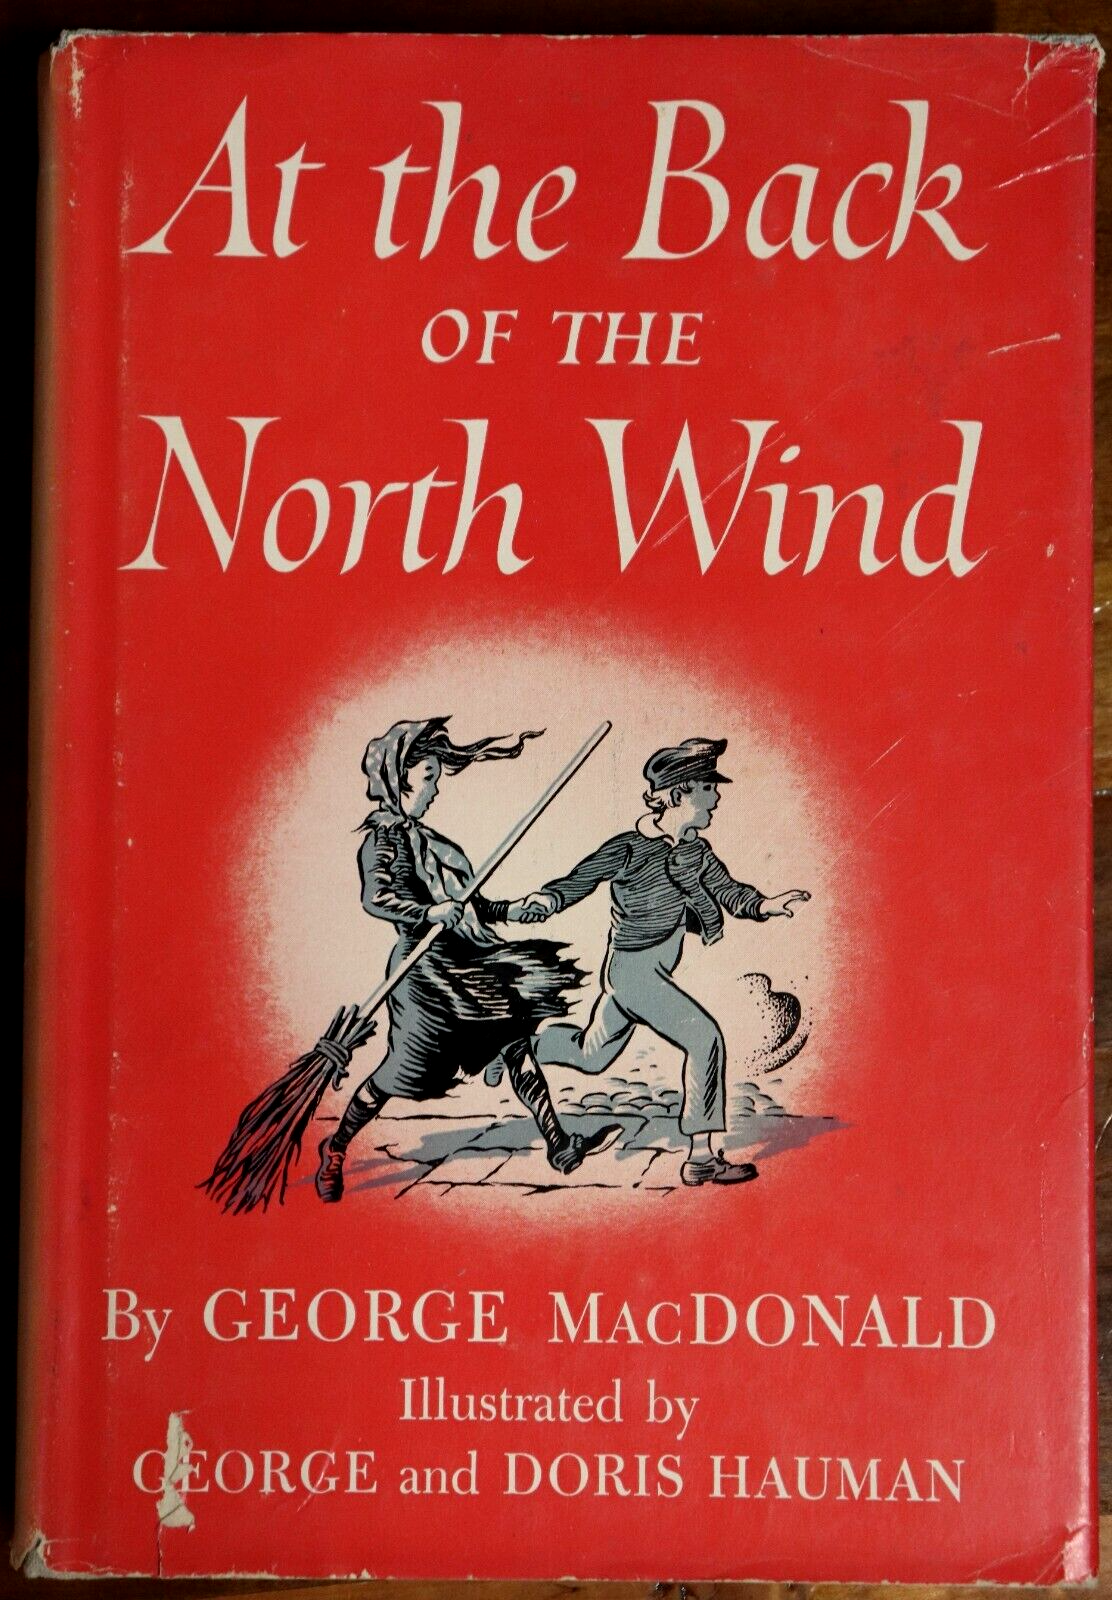 At The Back Of The North Wind by G Mac Donald - 1963 - Vintage Fiction Book